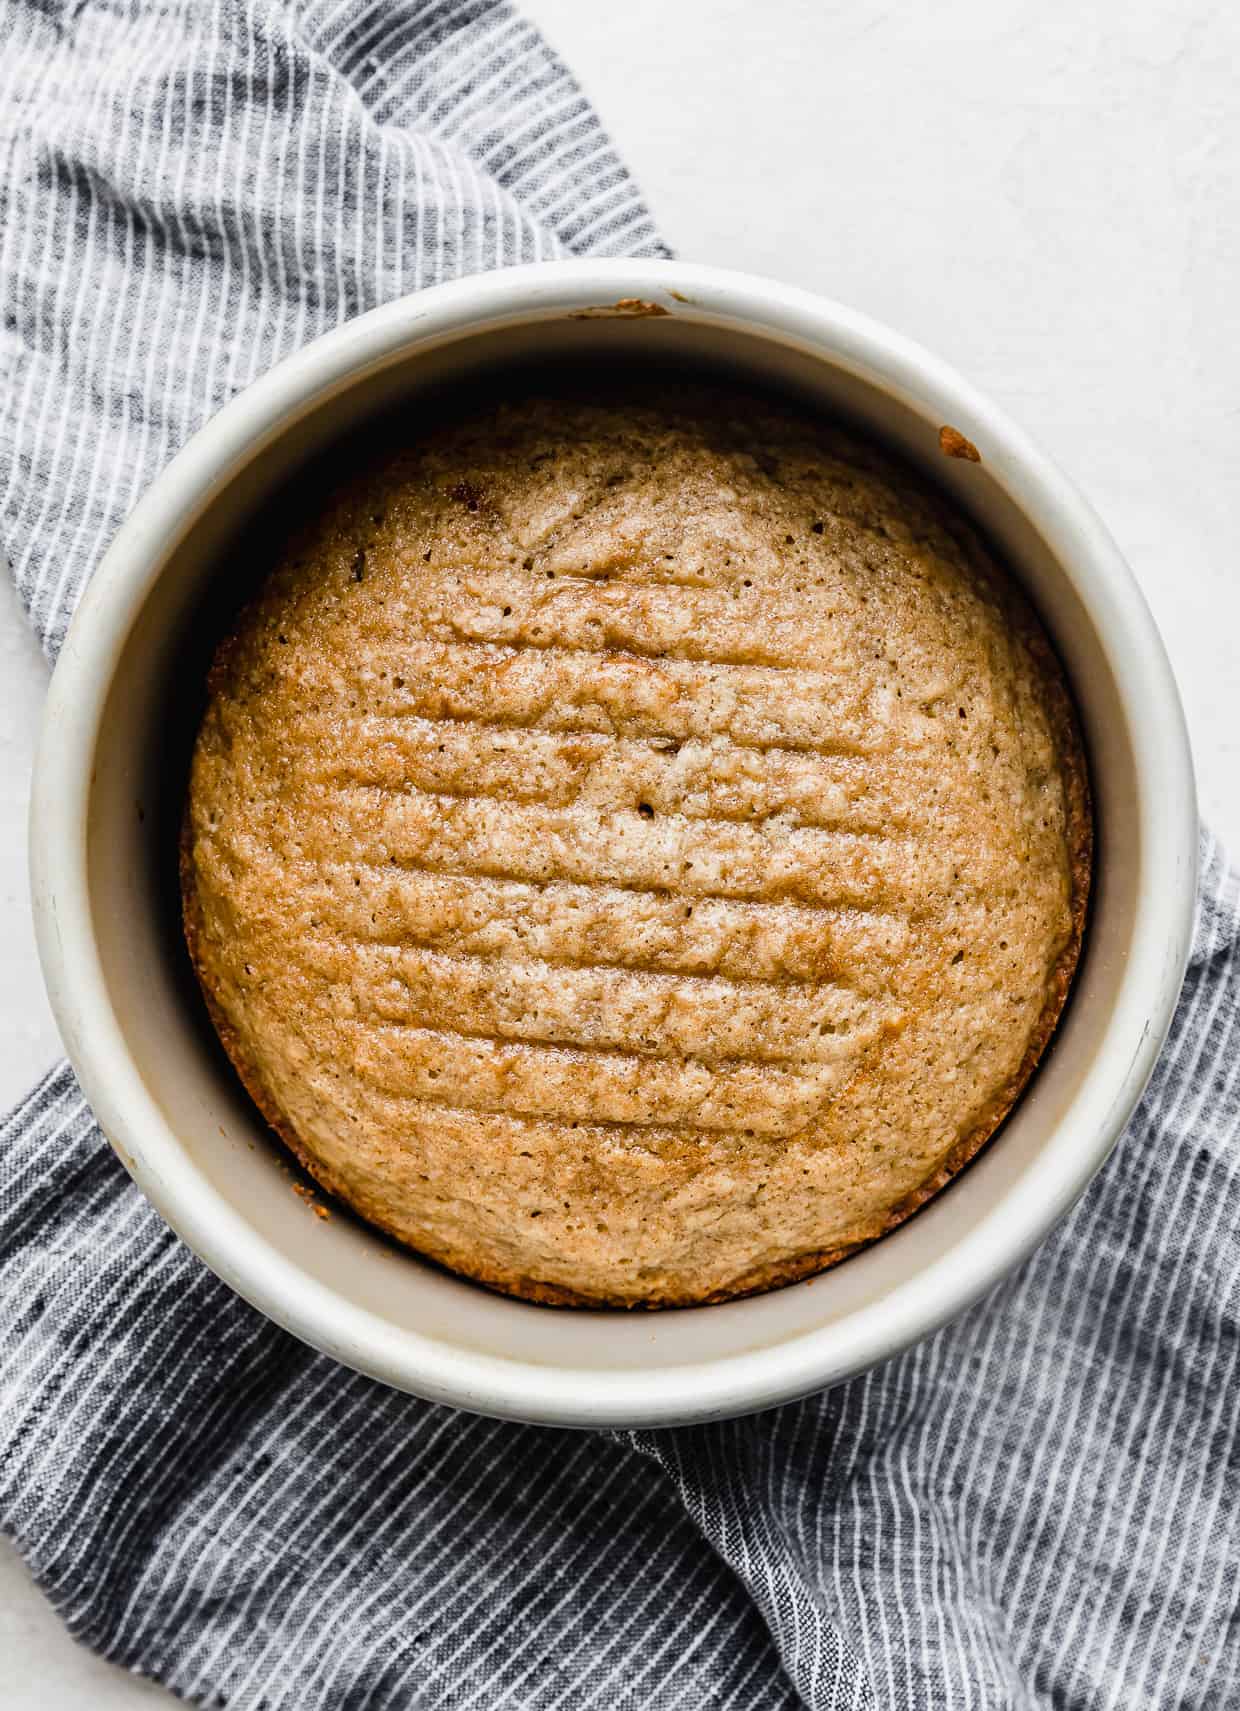 A baked Spice Cake in a round cake pan.